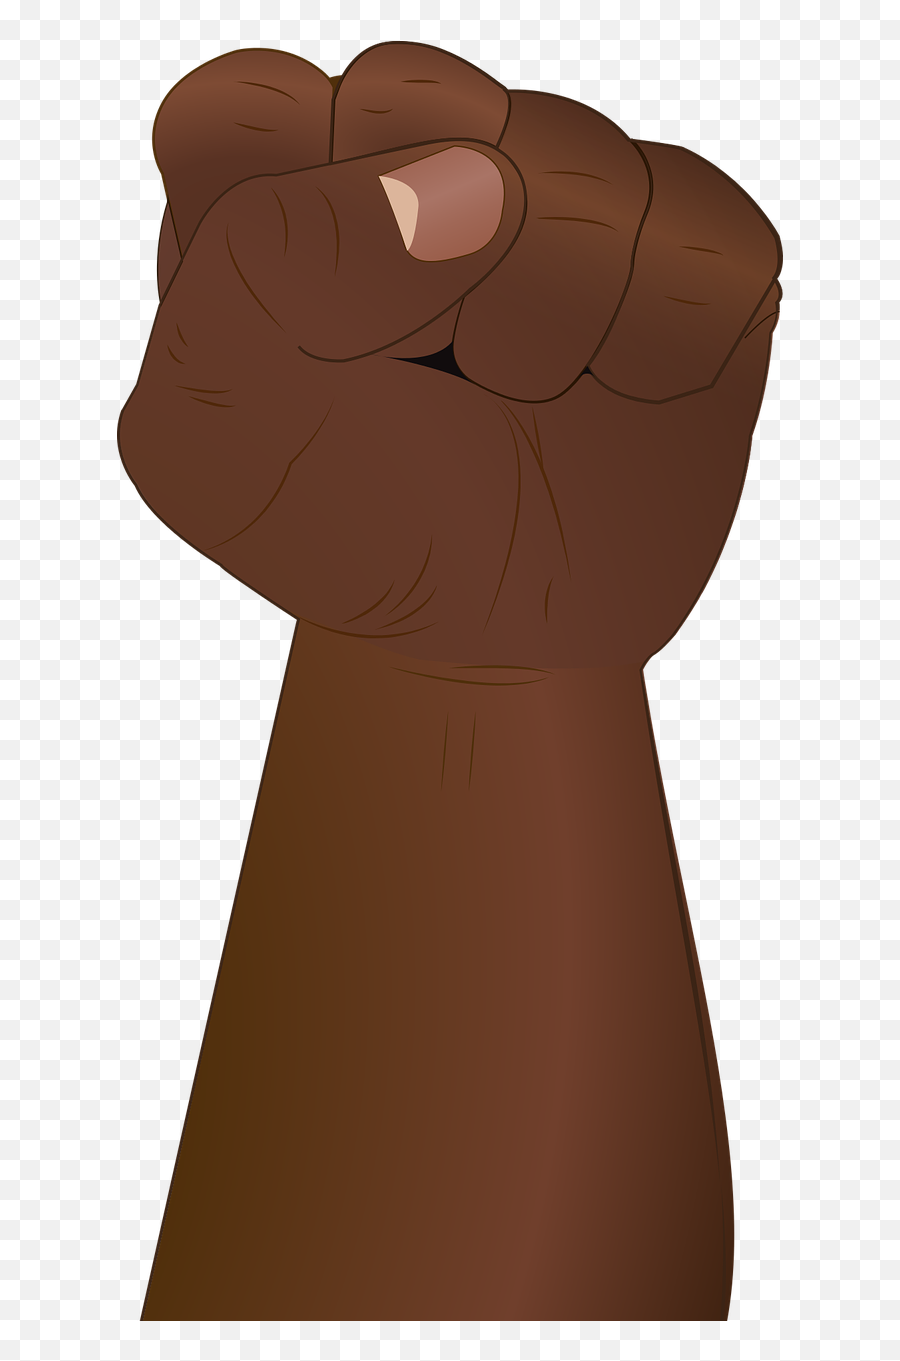 Download Free Photo Of Fisthandrevolutionfreedompower - Brown Raised Fist Png,Clenched Fist Icon